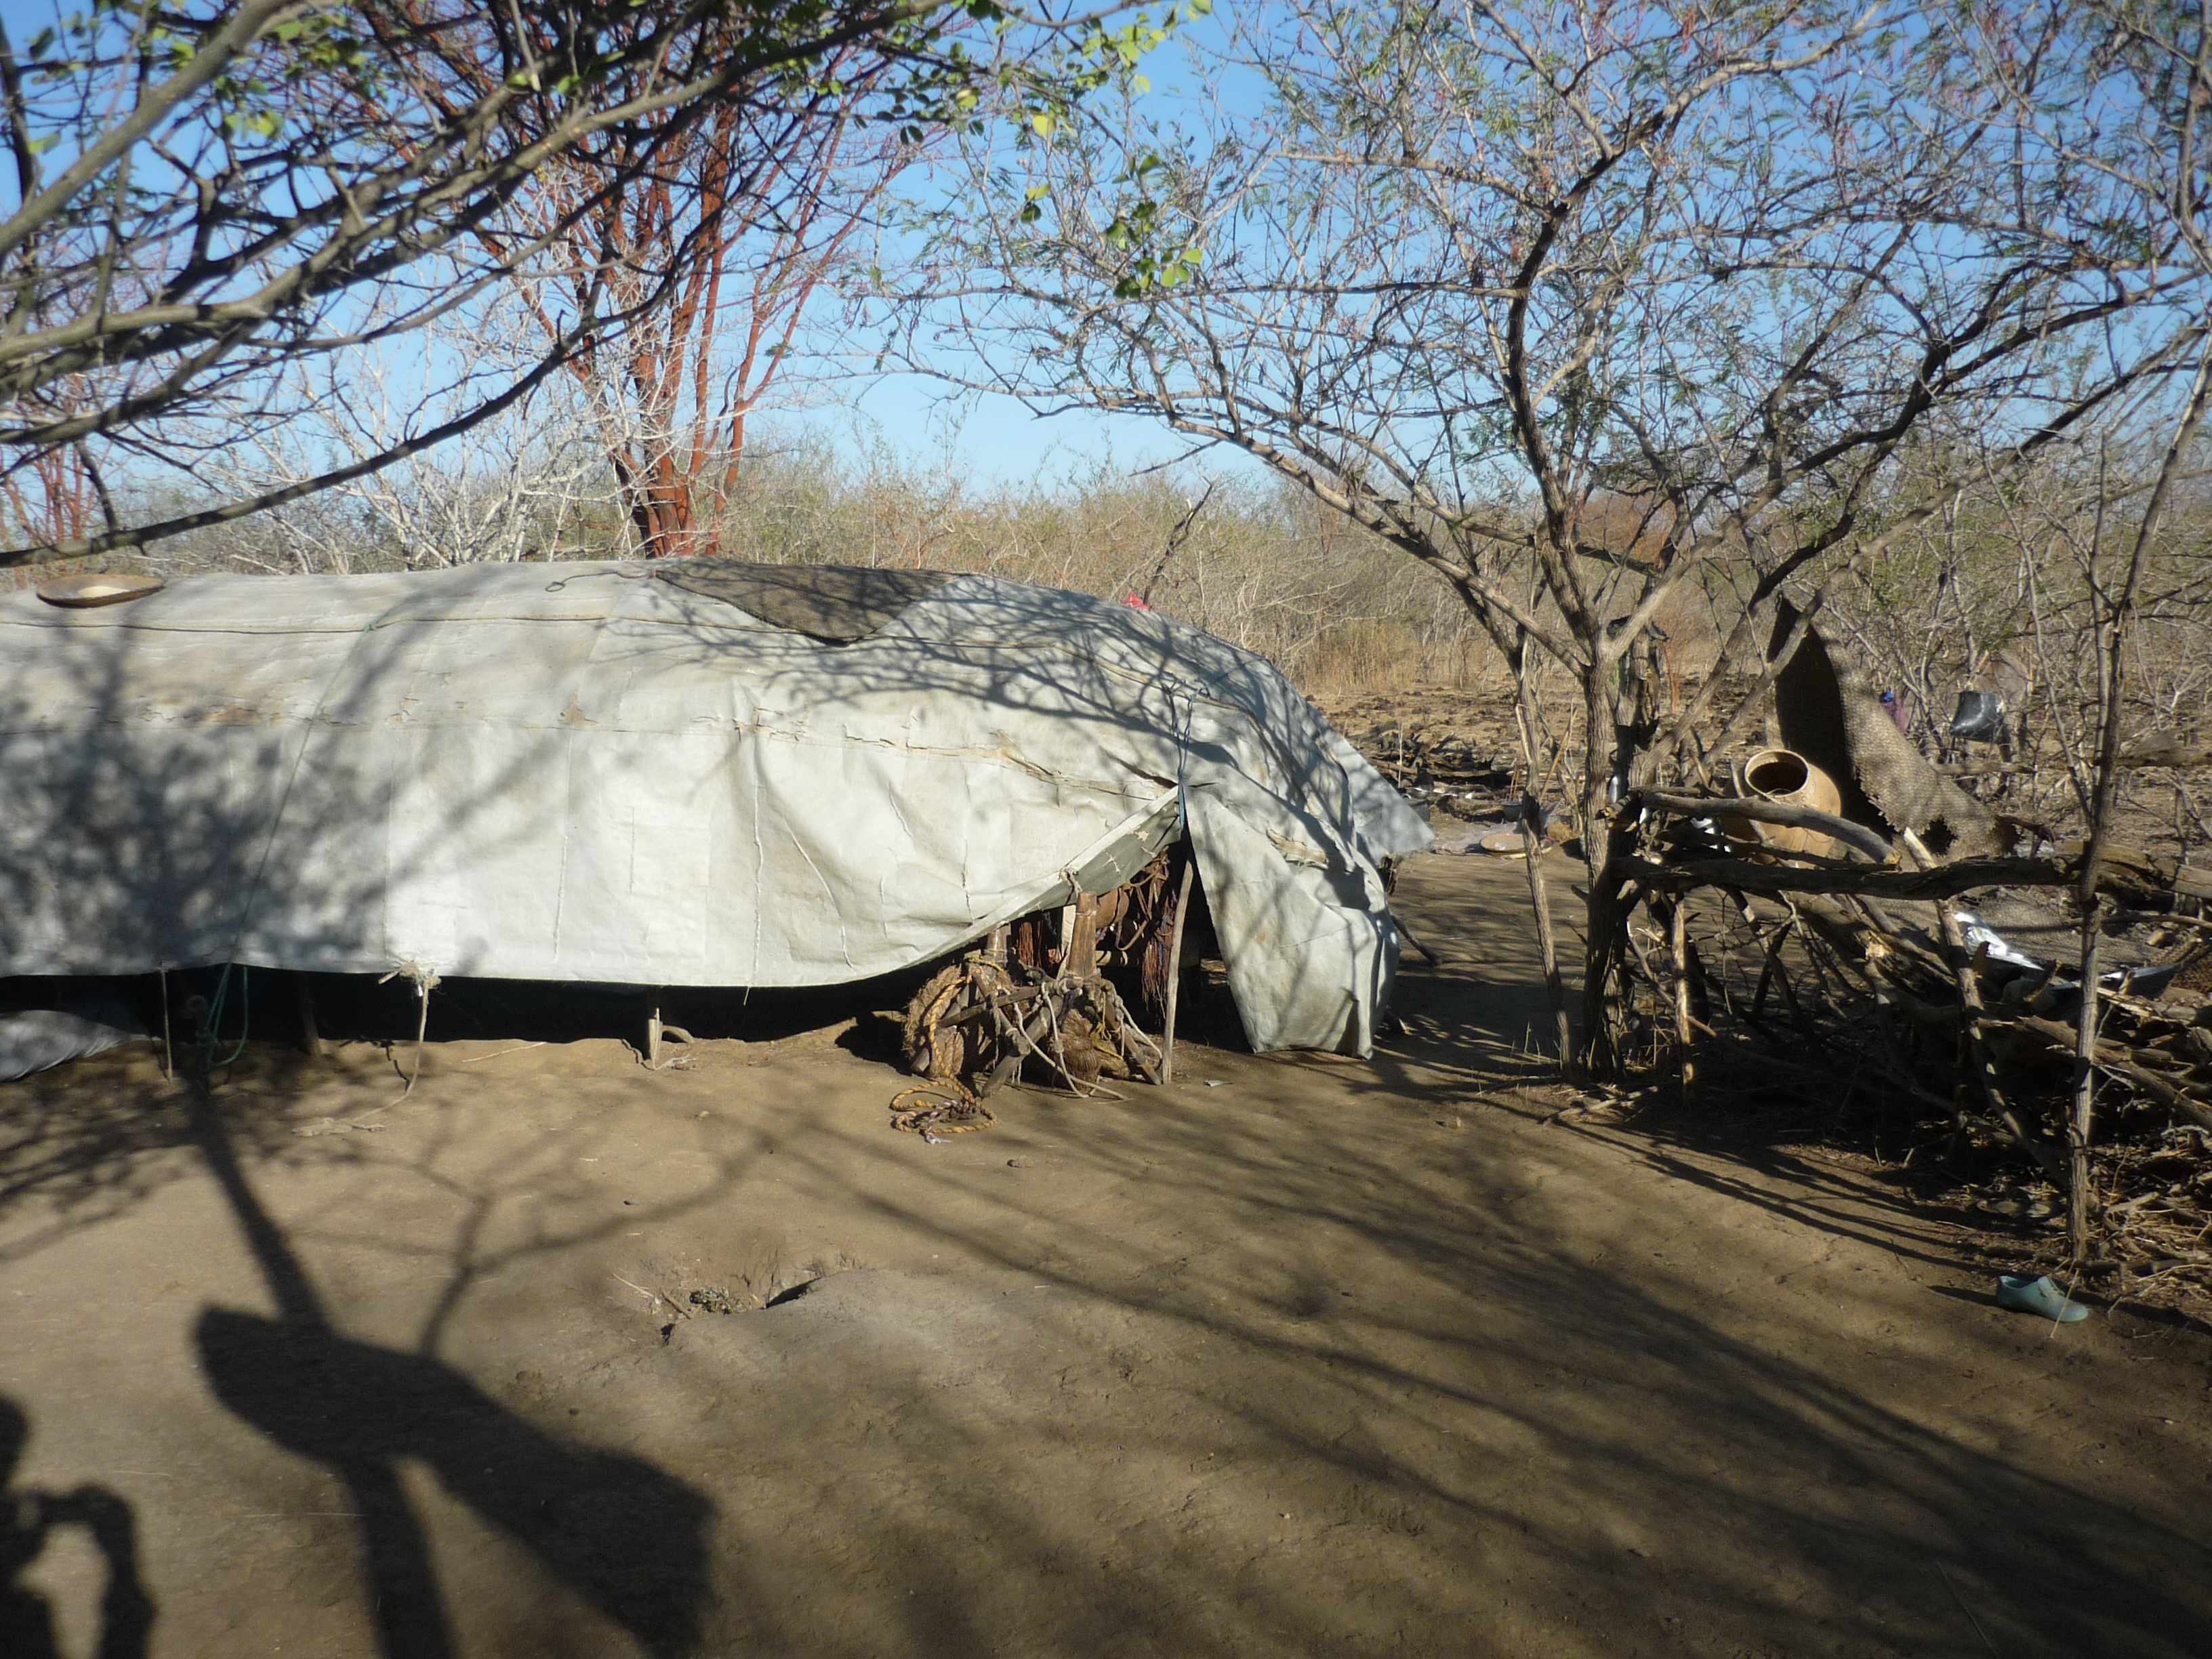 A typical nomadic camp or "ferikh", Central Chad